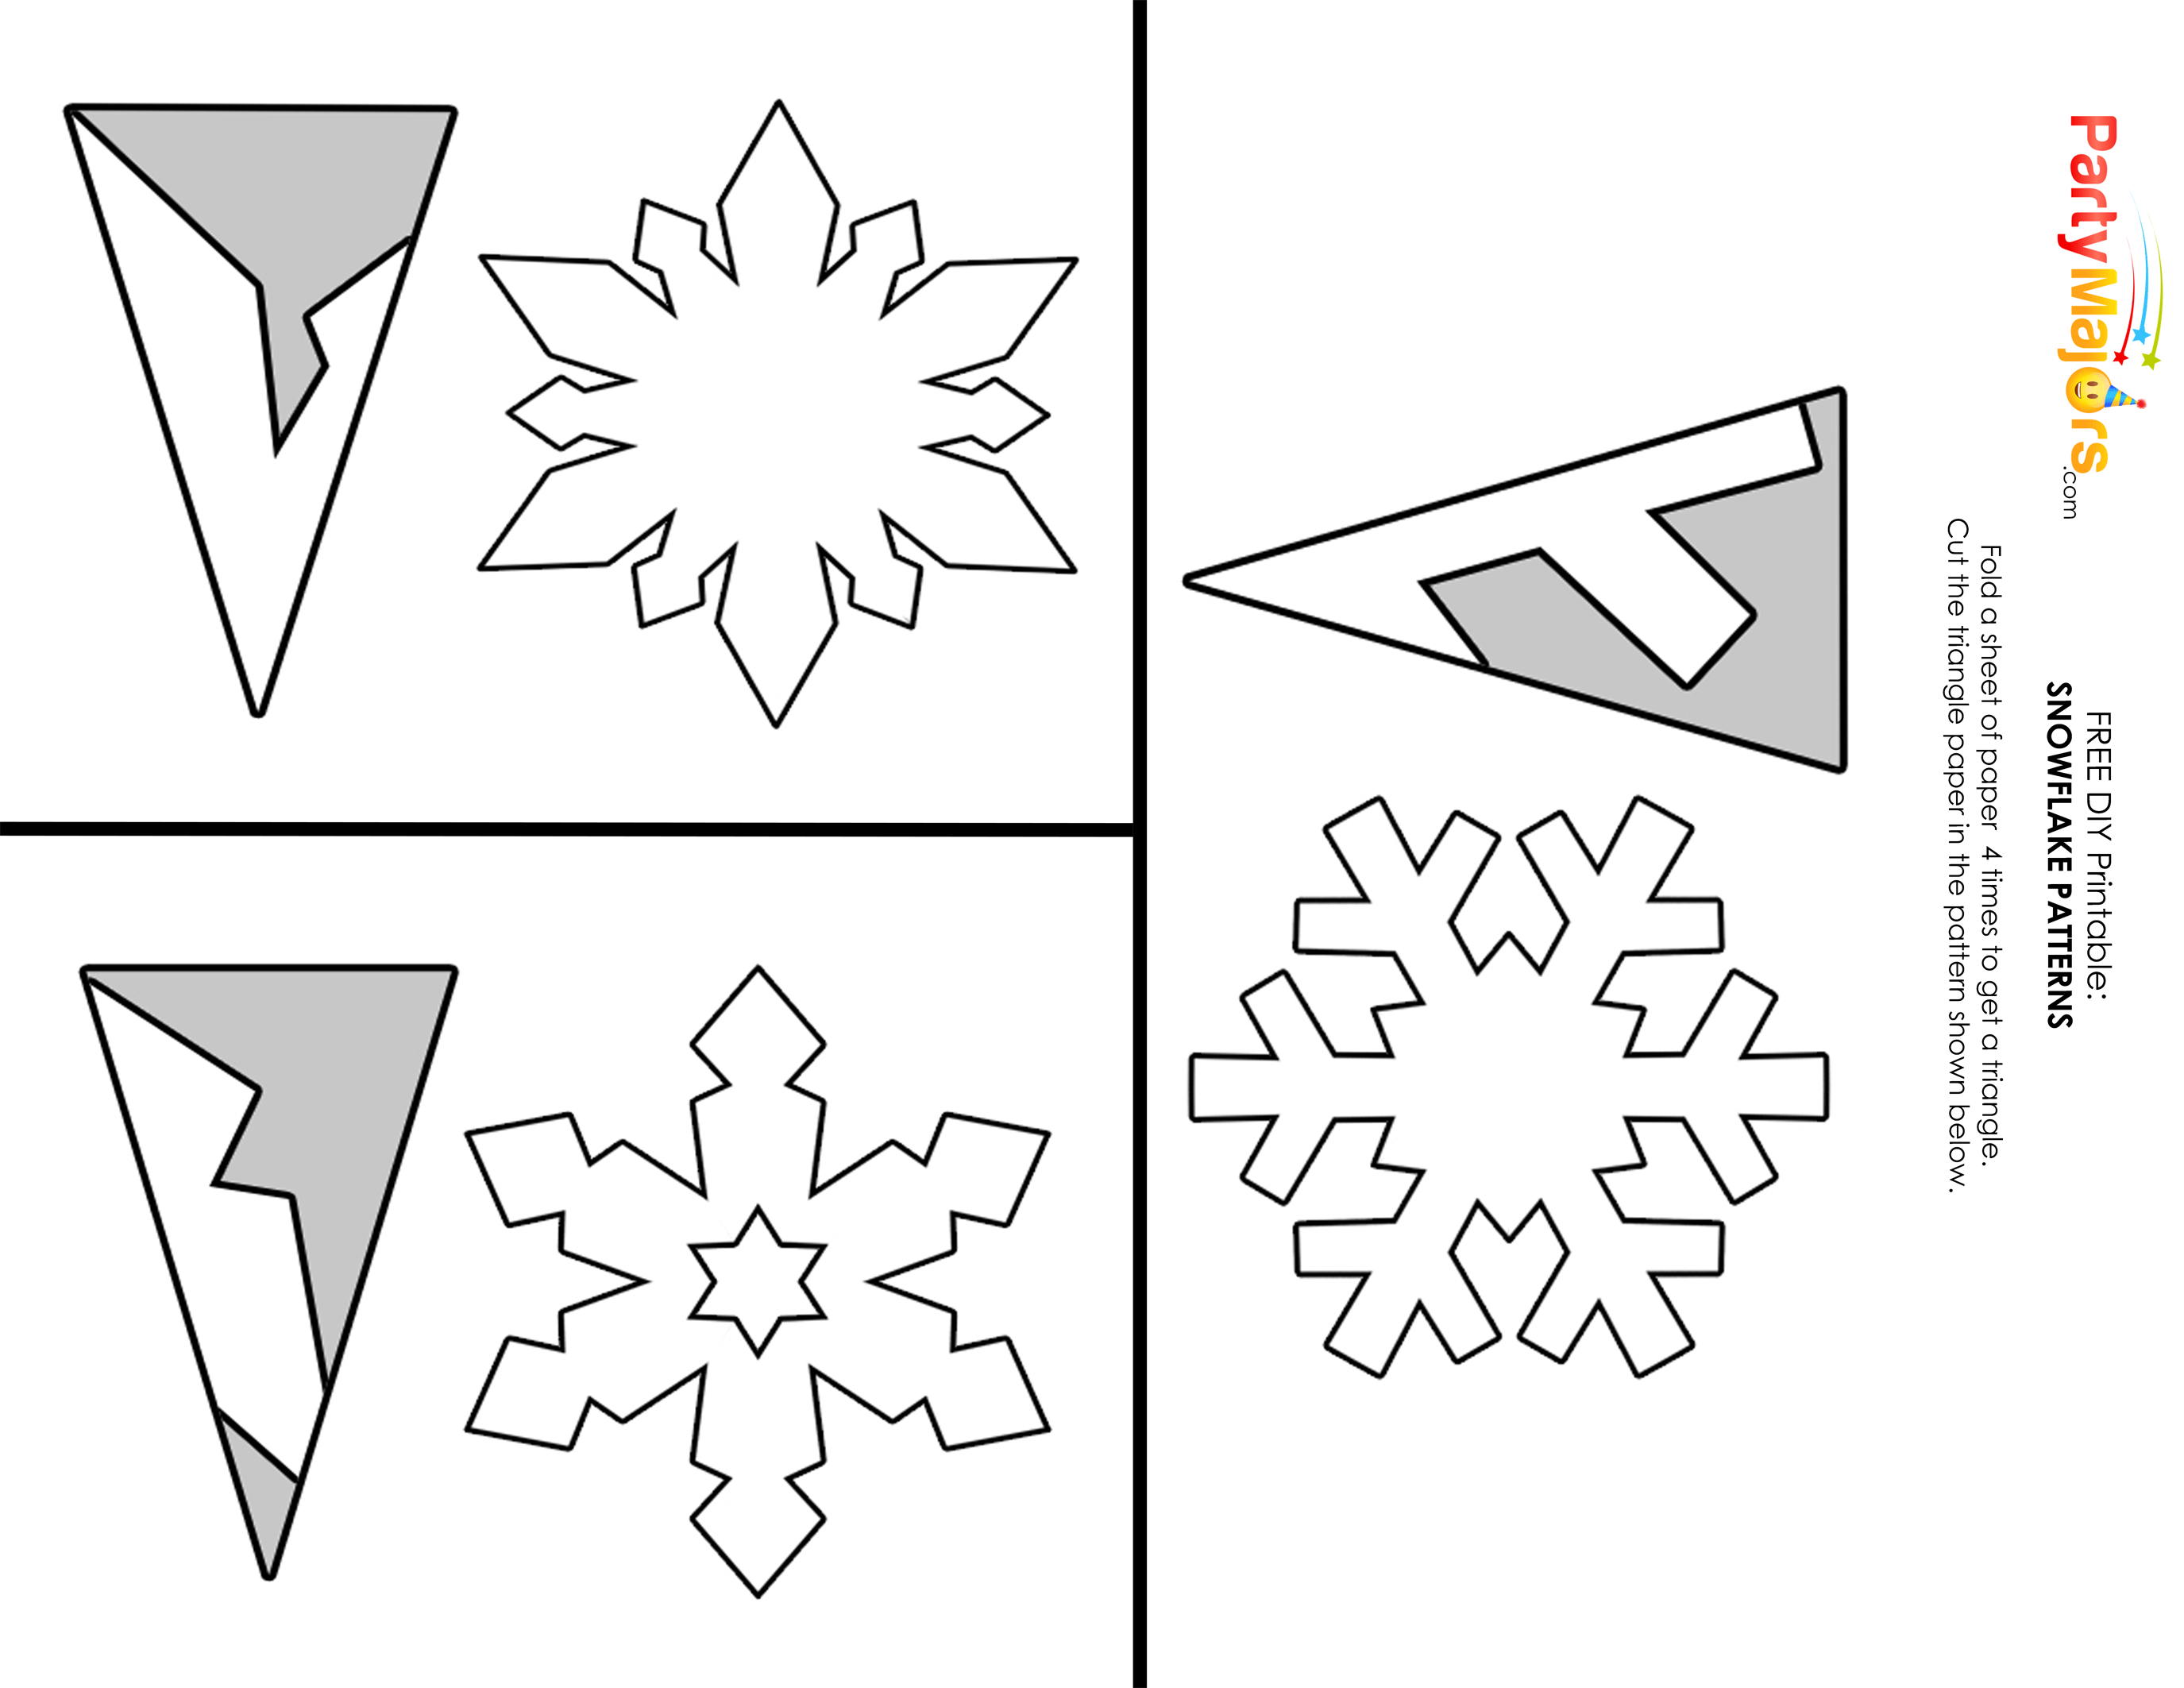 DIY Paper Snowflakes Template Easy CutOut Decorations